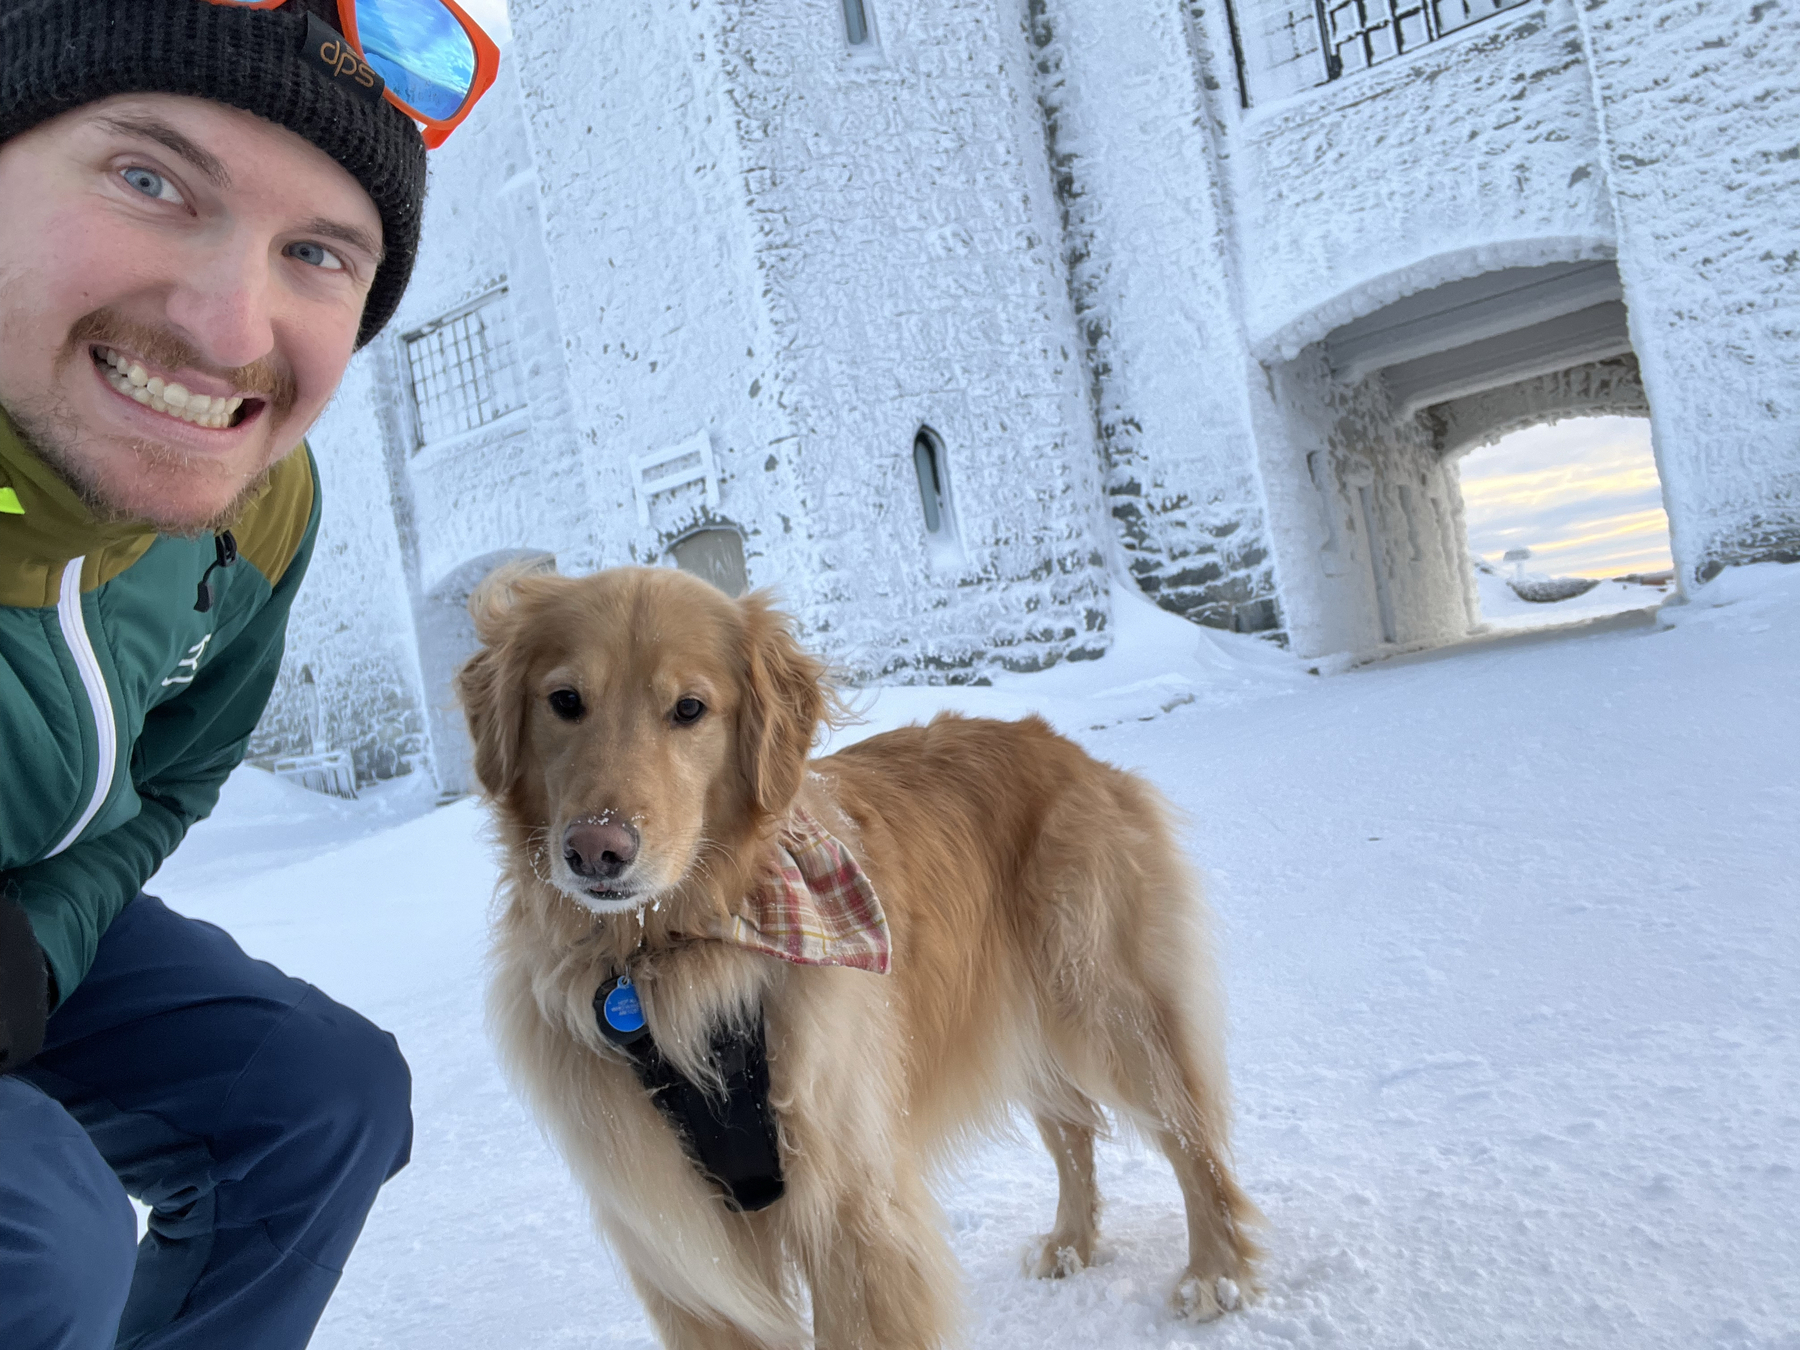 Man with golden retriever dog behind him in front of a ice covered castle.